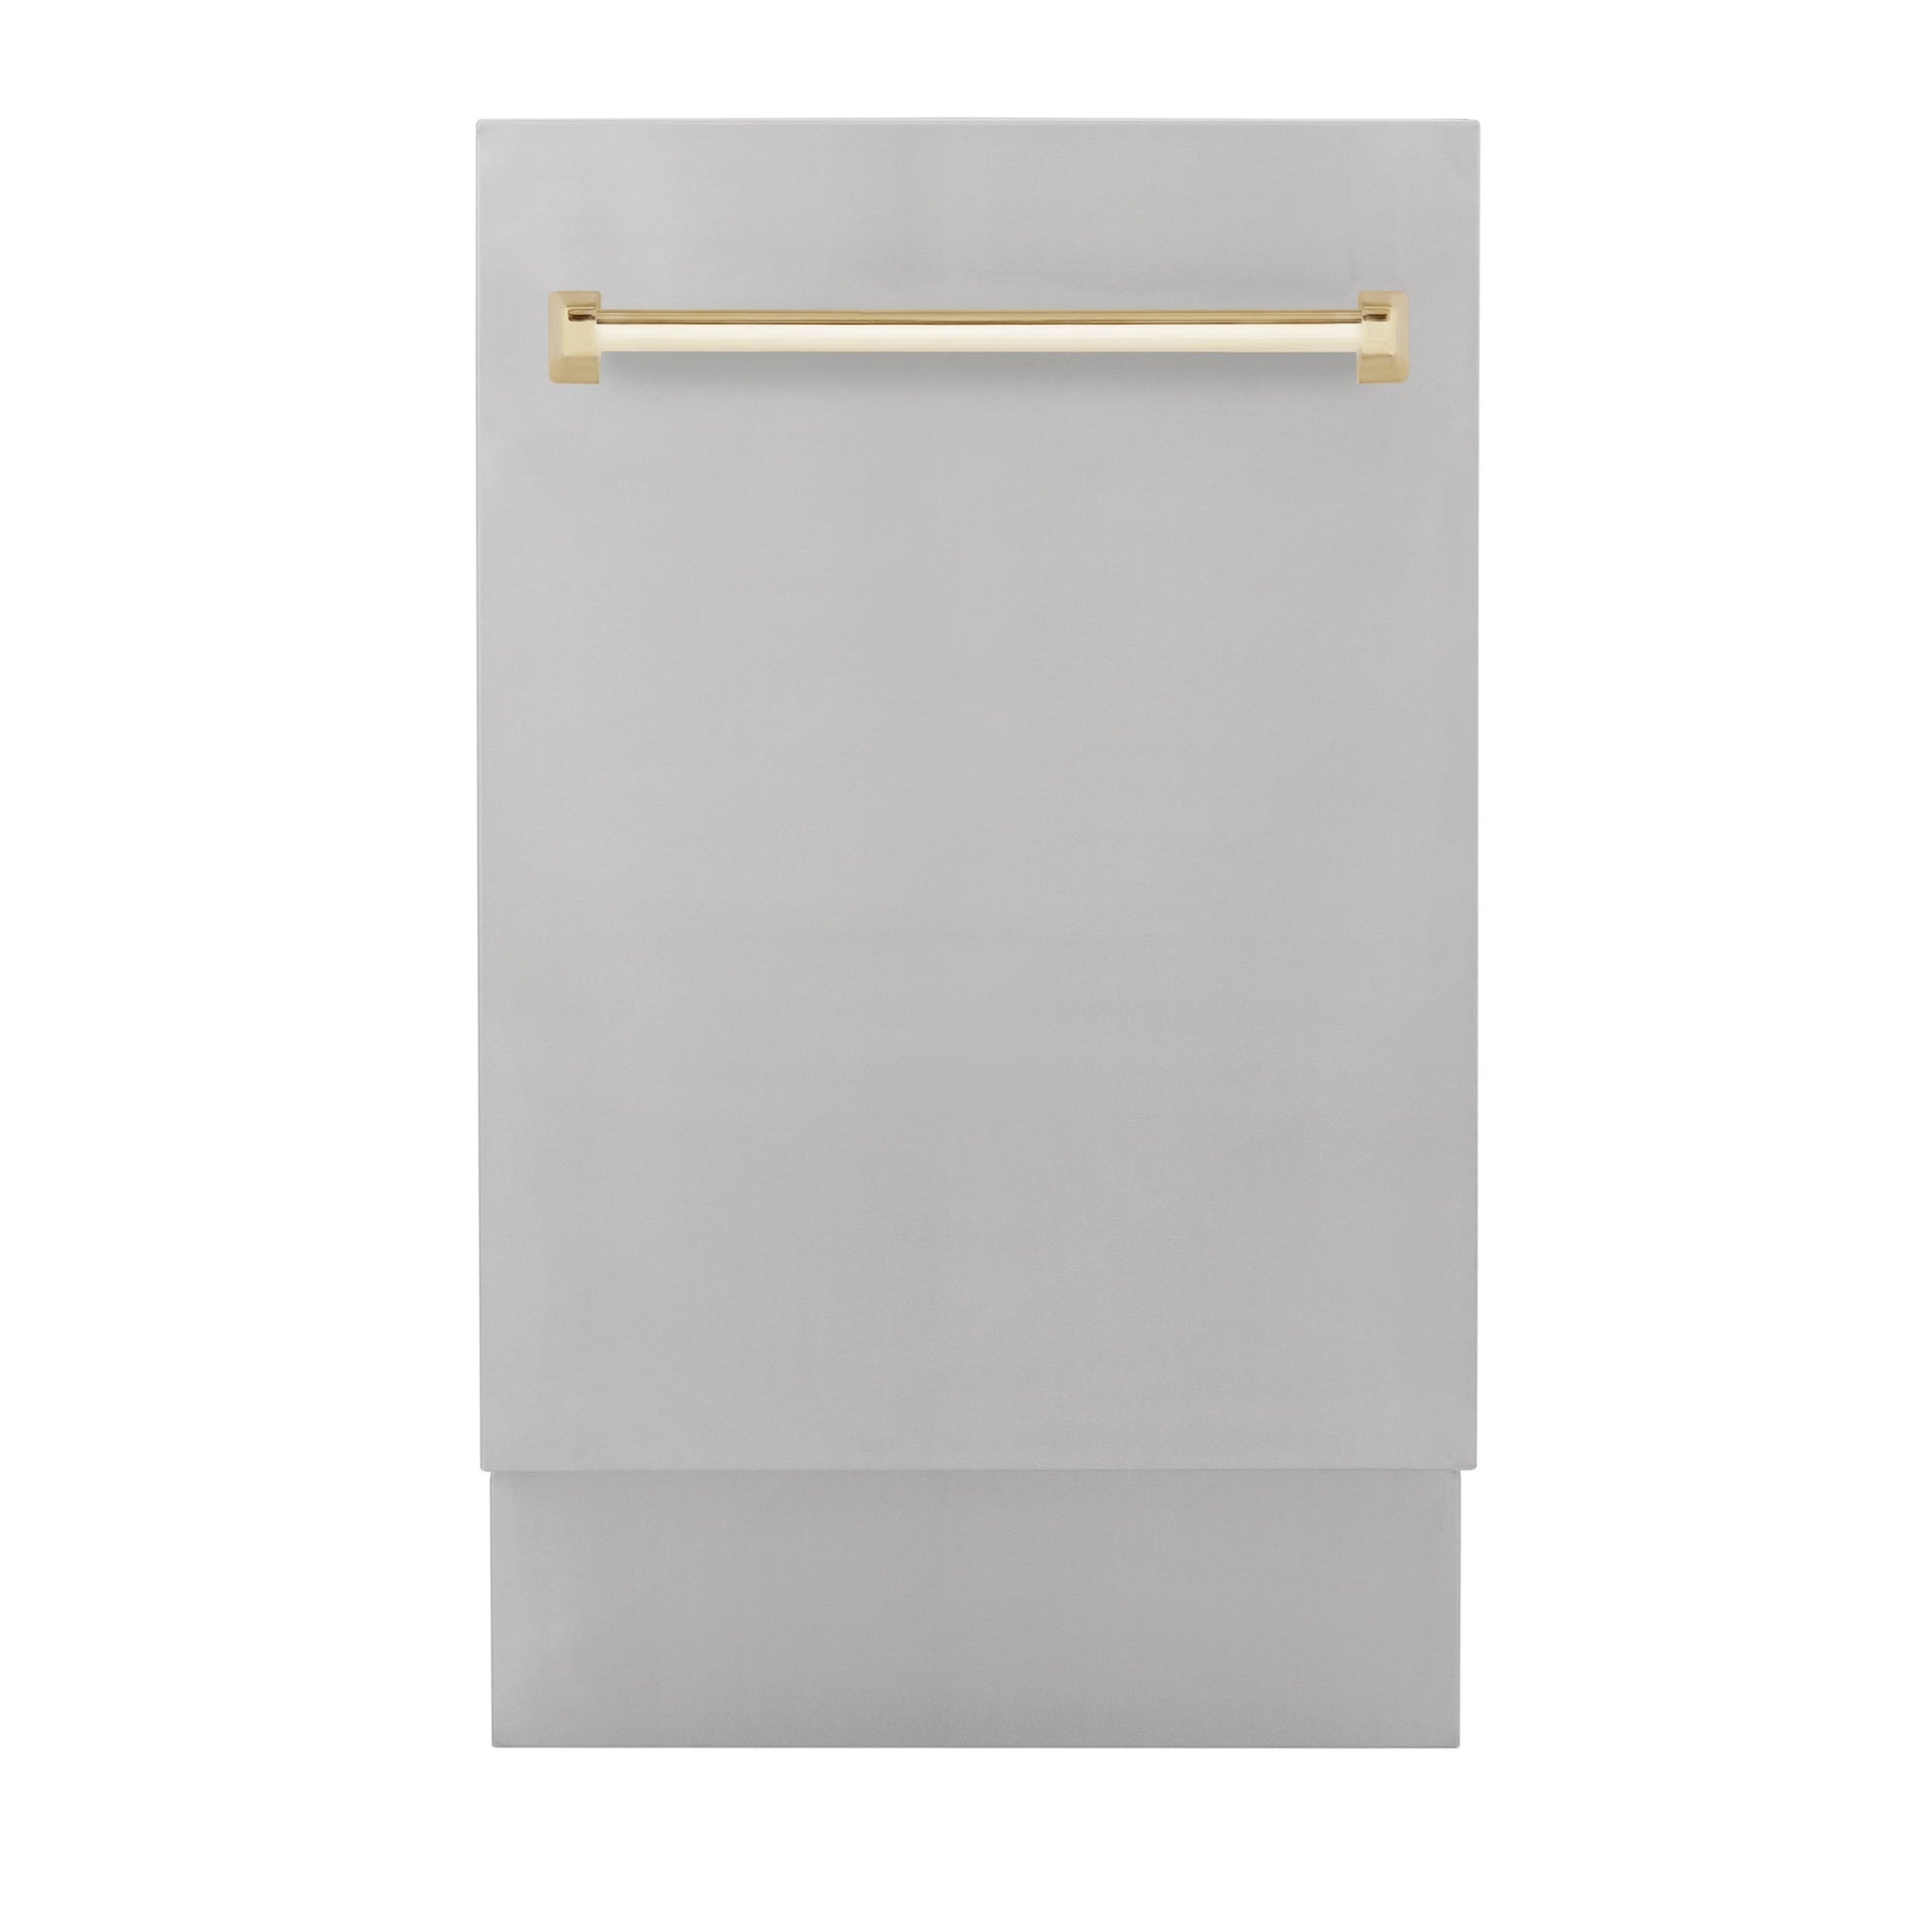 ZLINE Autograph Edition 18 in. Compact 3rd Rack Top Control Dishwasher in Stainless Steel with Polished Gold Handle, 51dBa (DWVZ-304-18-G) front.